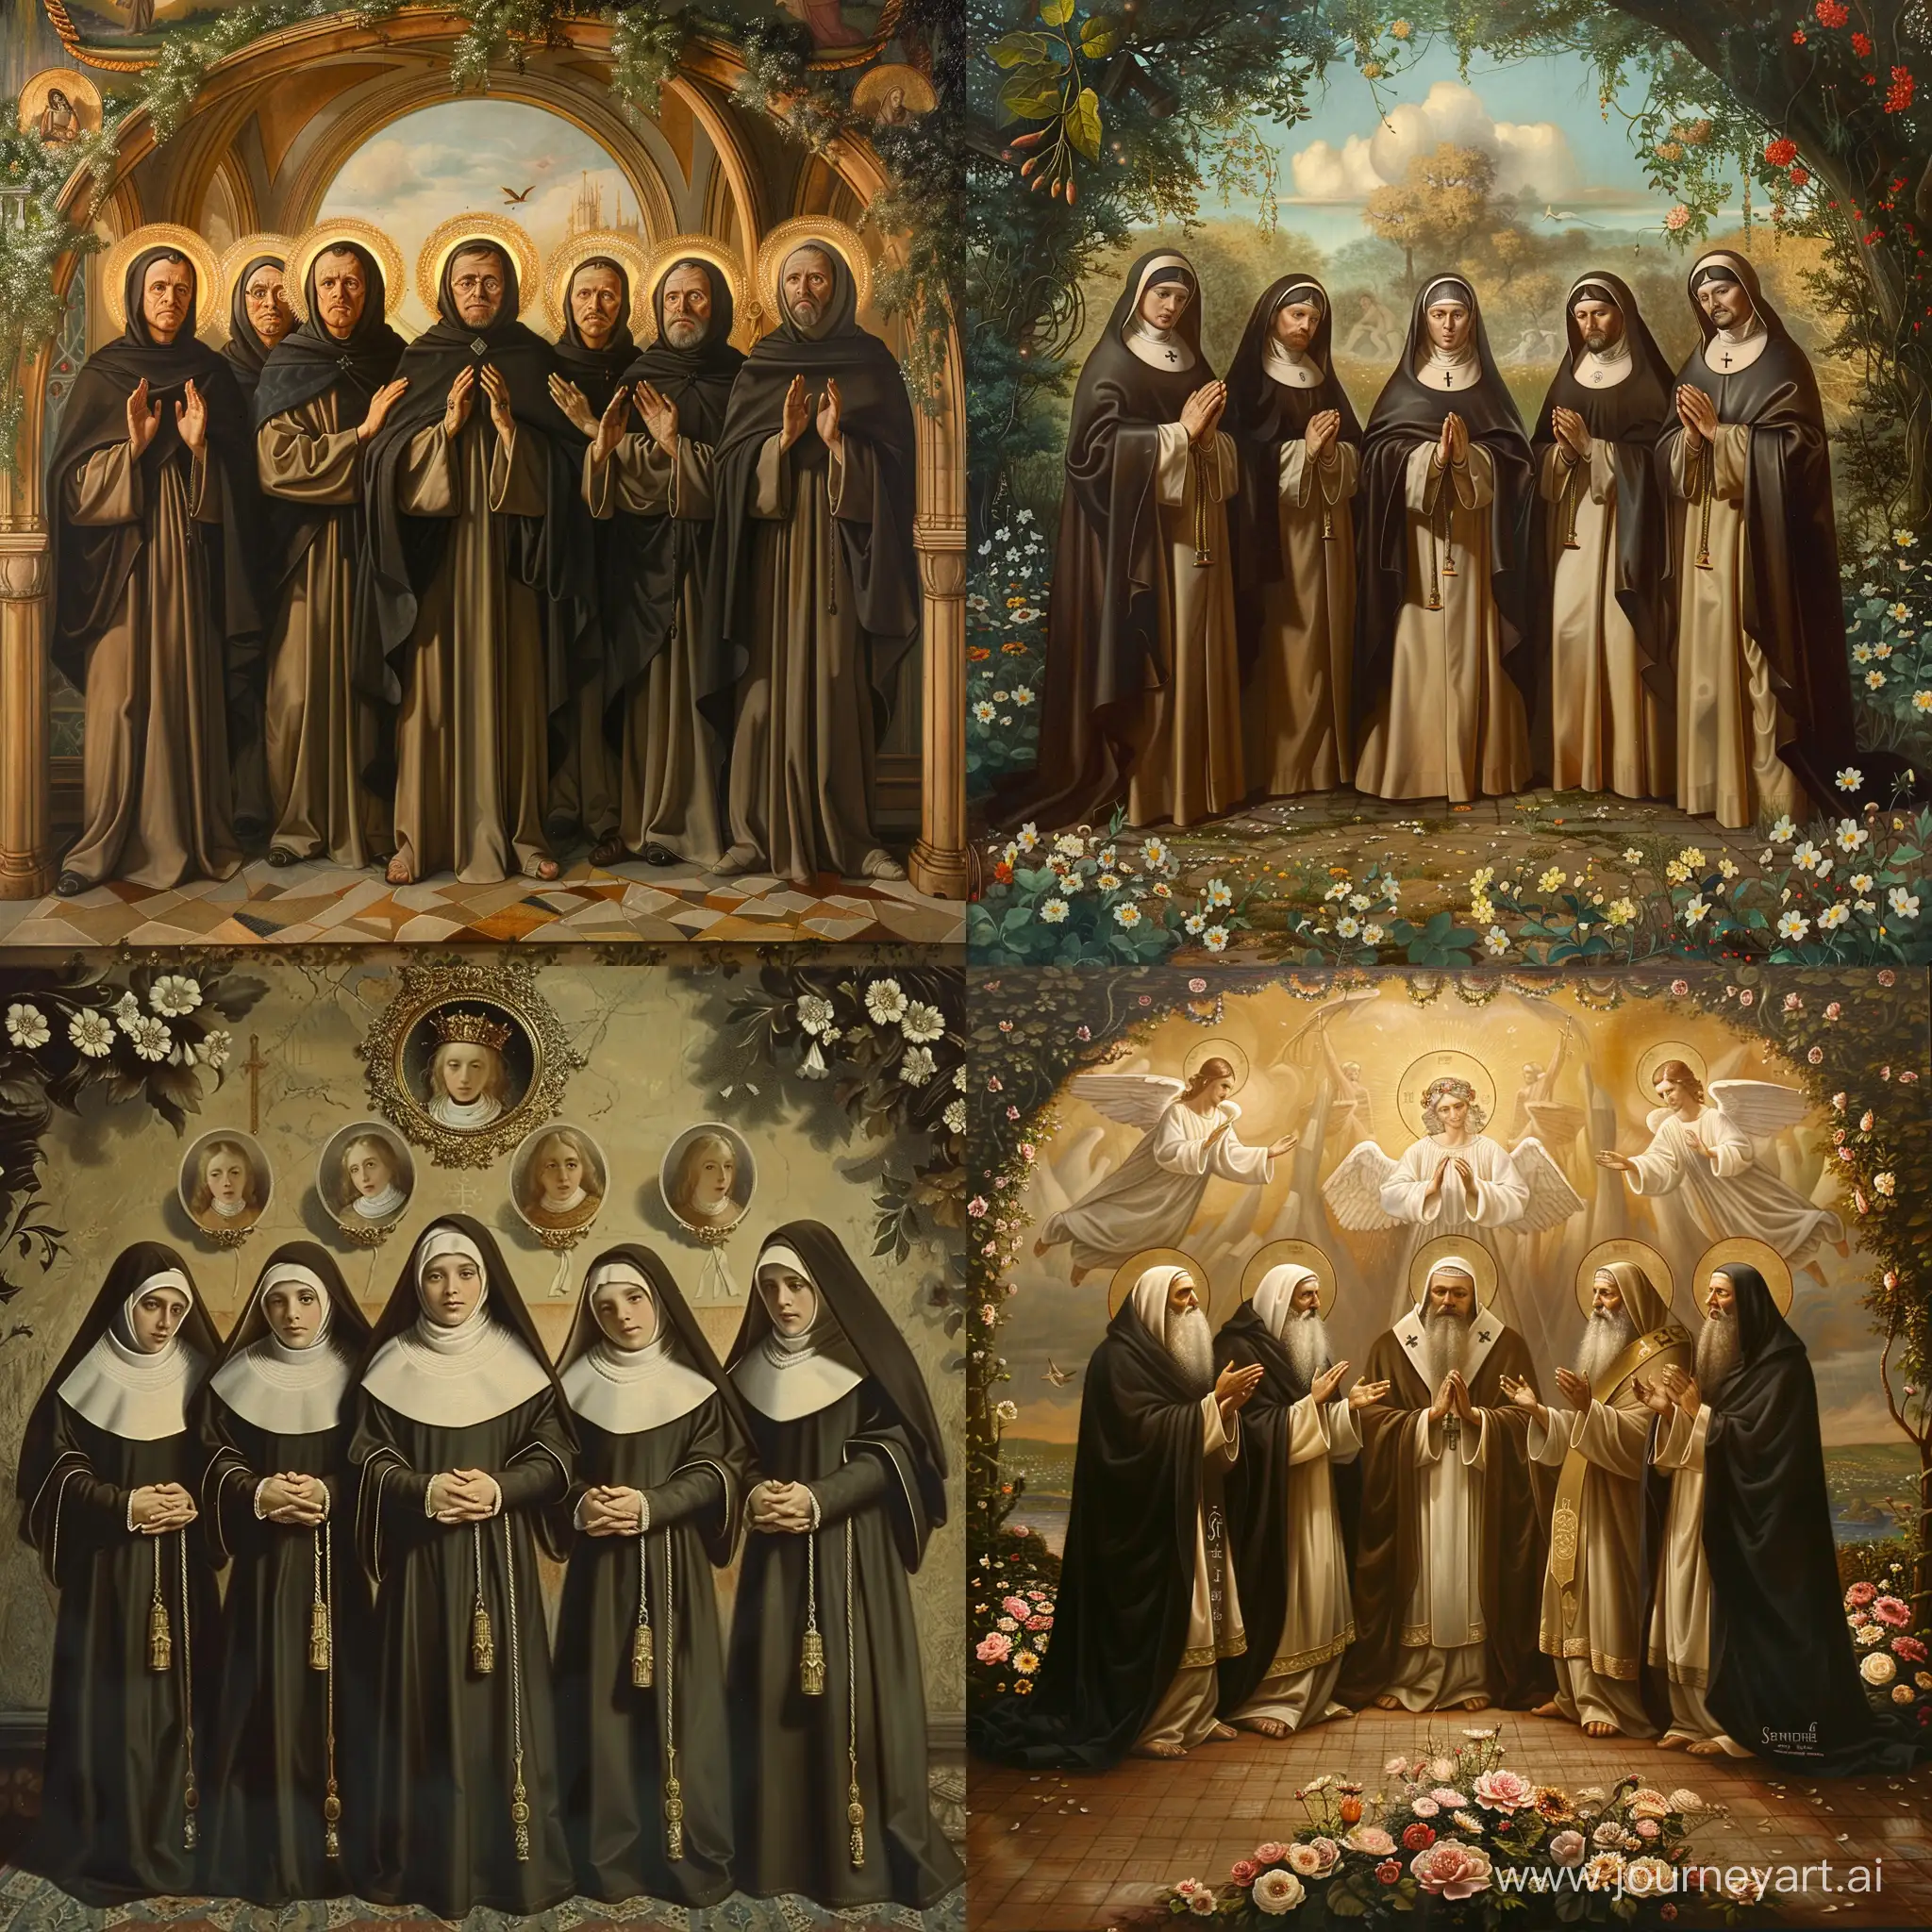 Seven-Founding-Fryars-of-the-Order-Servites-of-Mary-in-a-Serene-Portrait